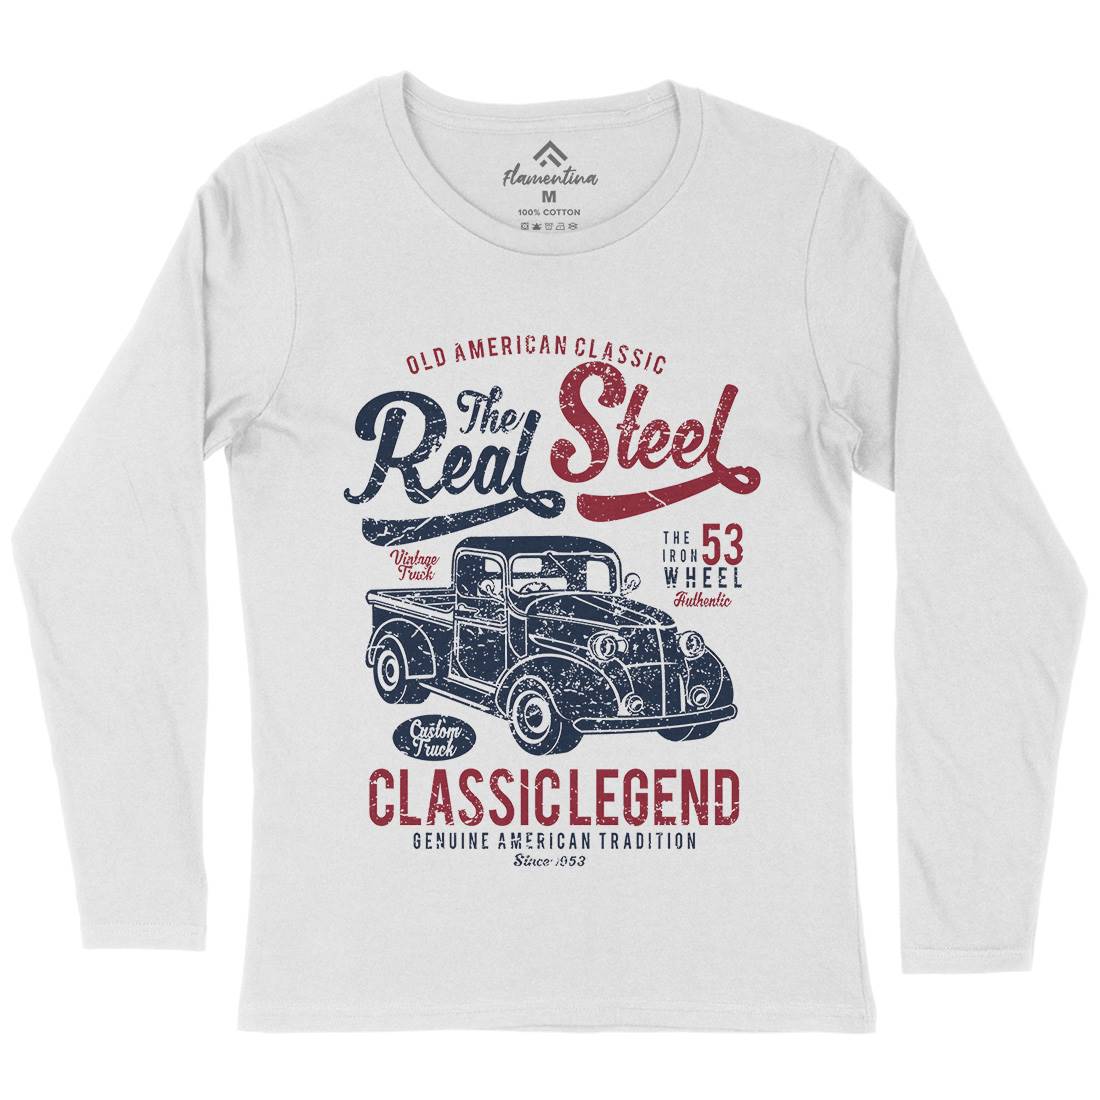 Real Steel Womens Long Sleeve T-Shirt Cars A177